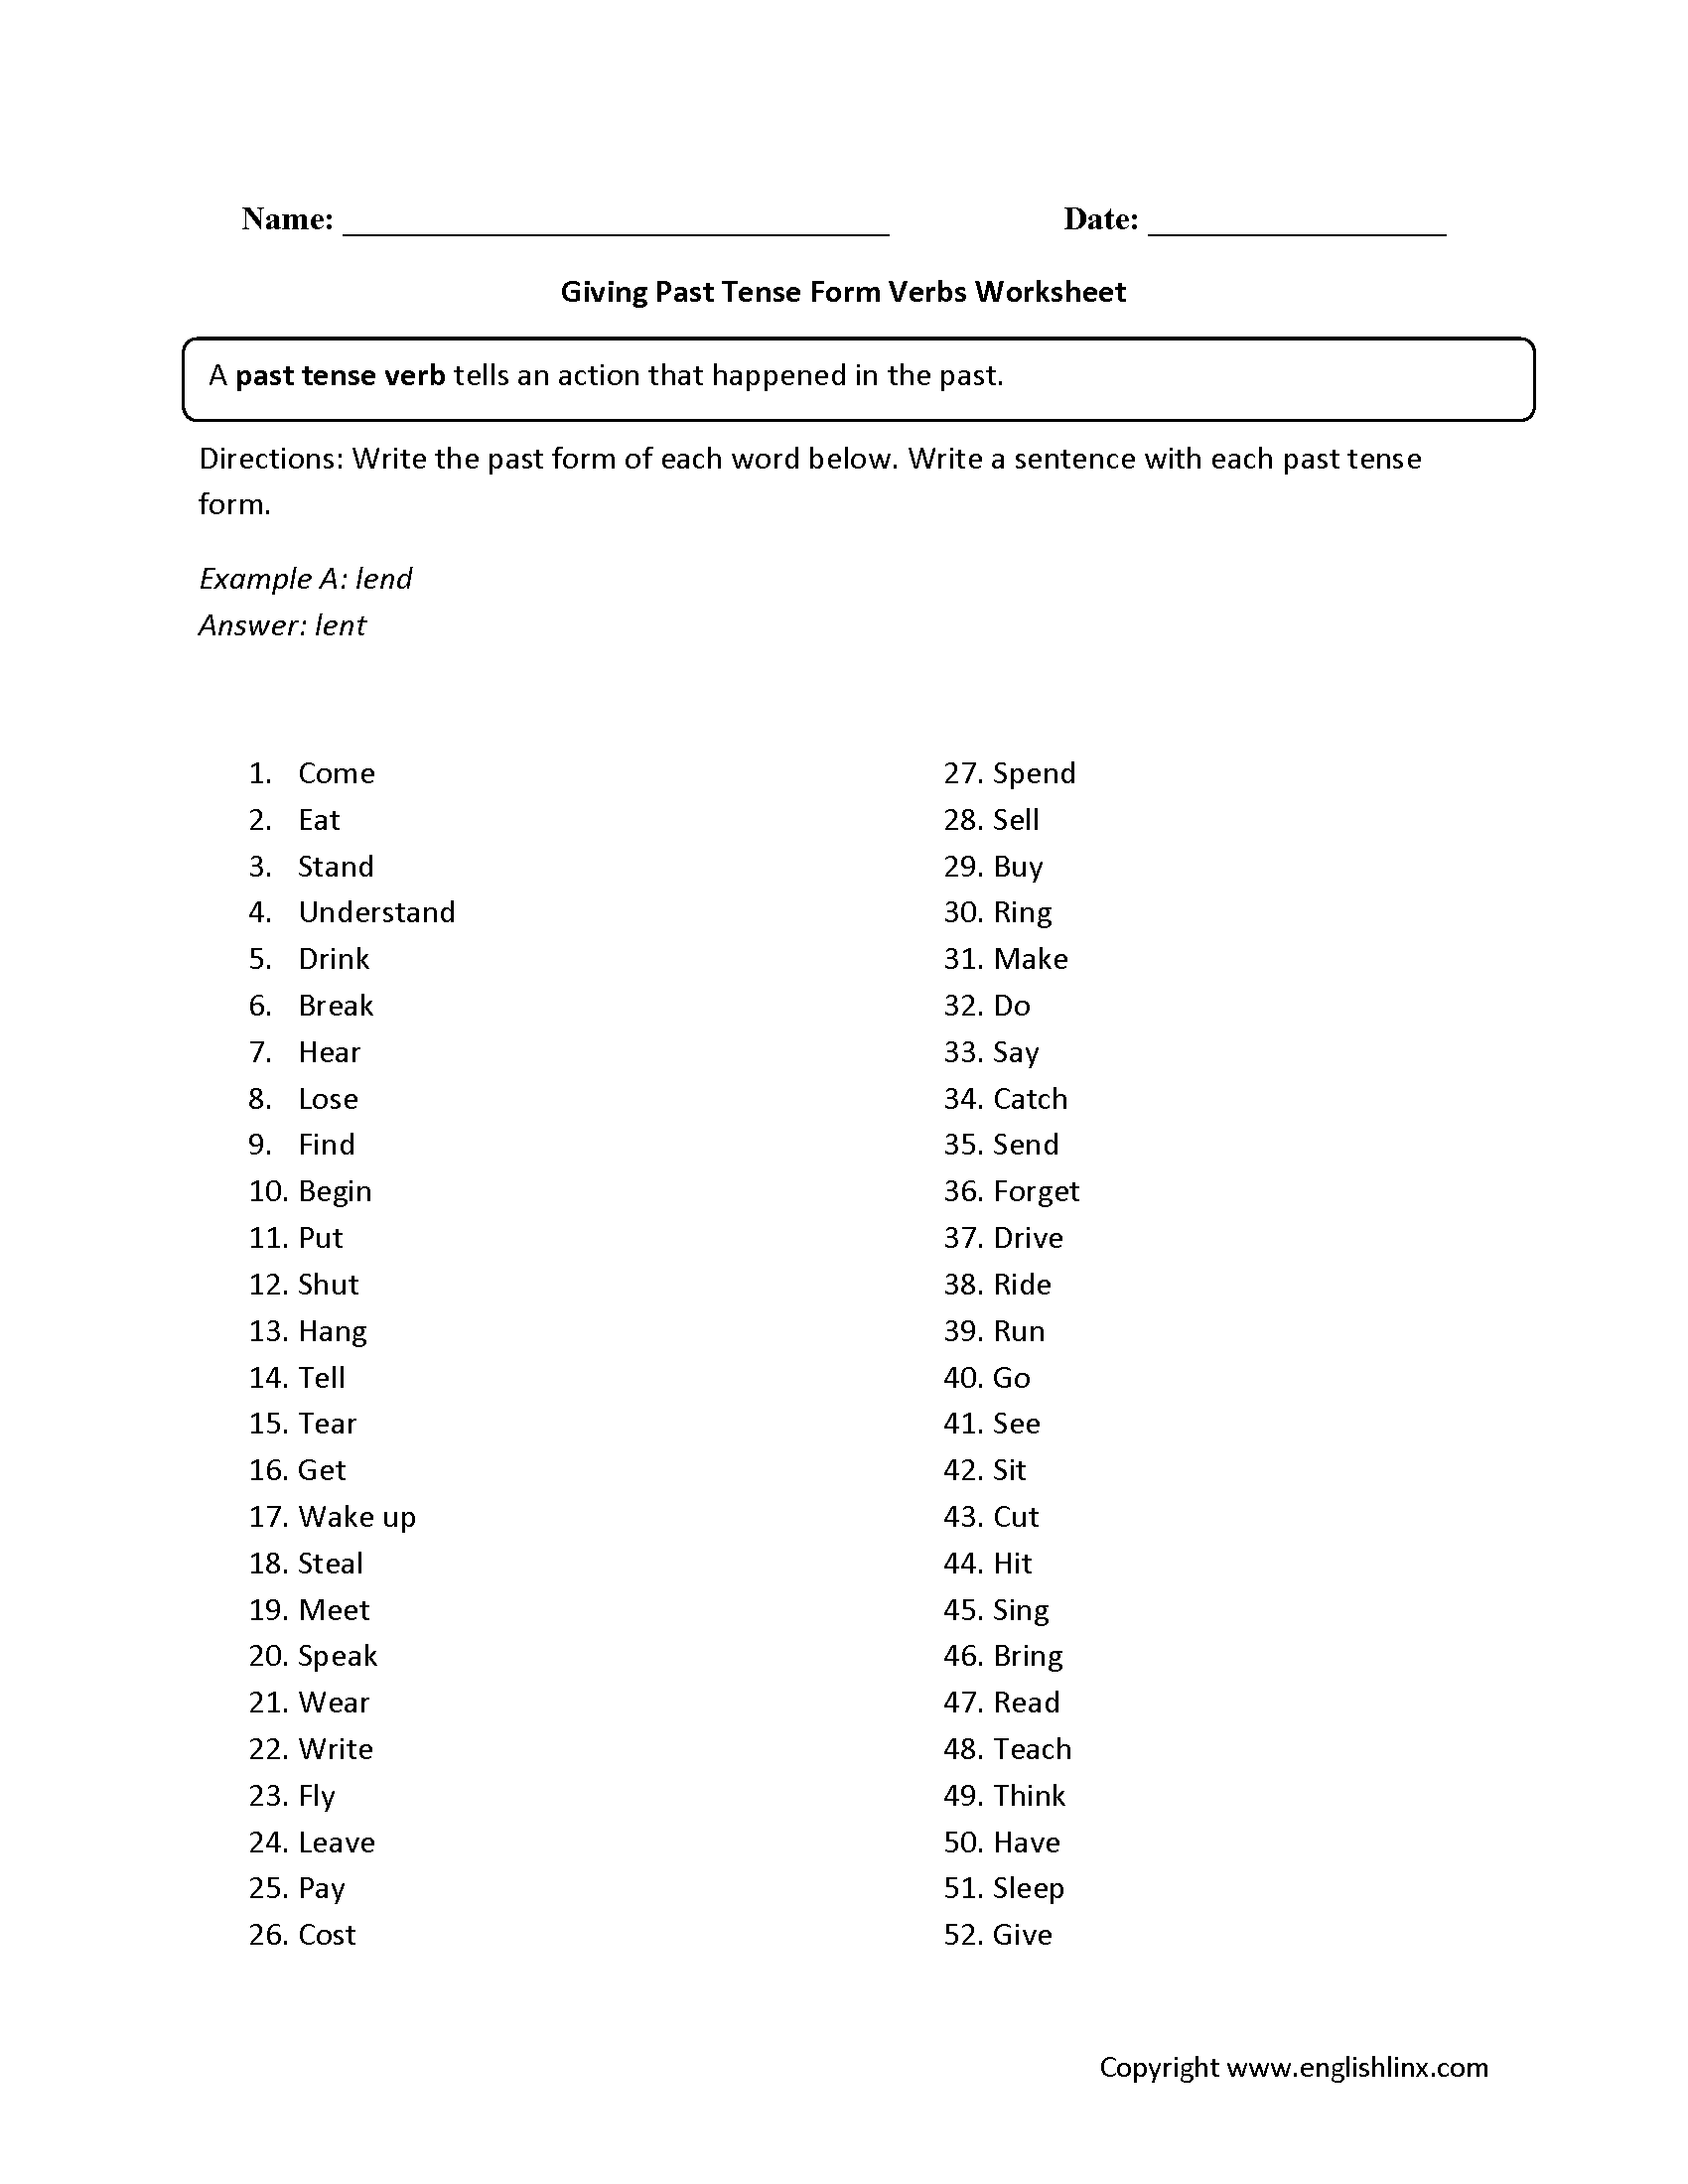 Give Past Tense Form Verbs Worksheet